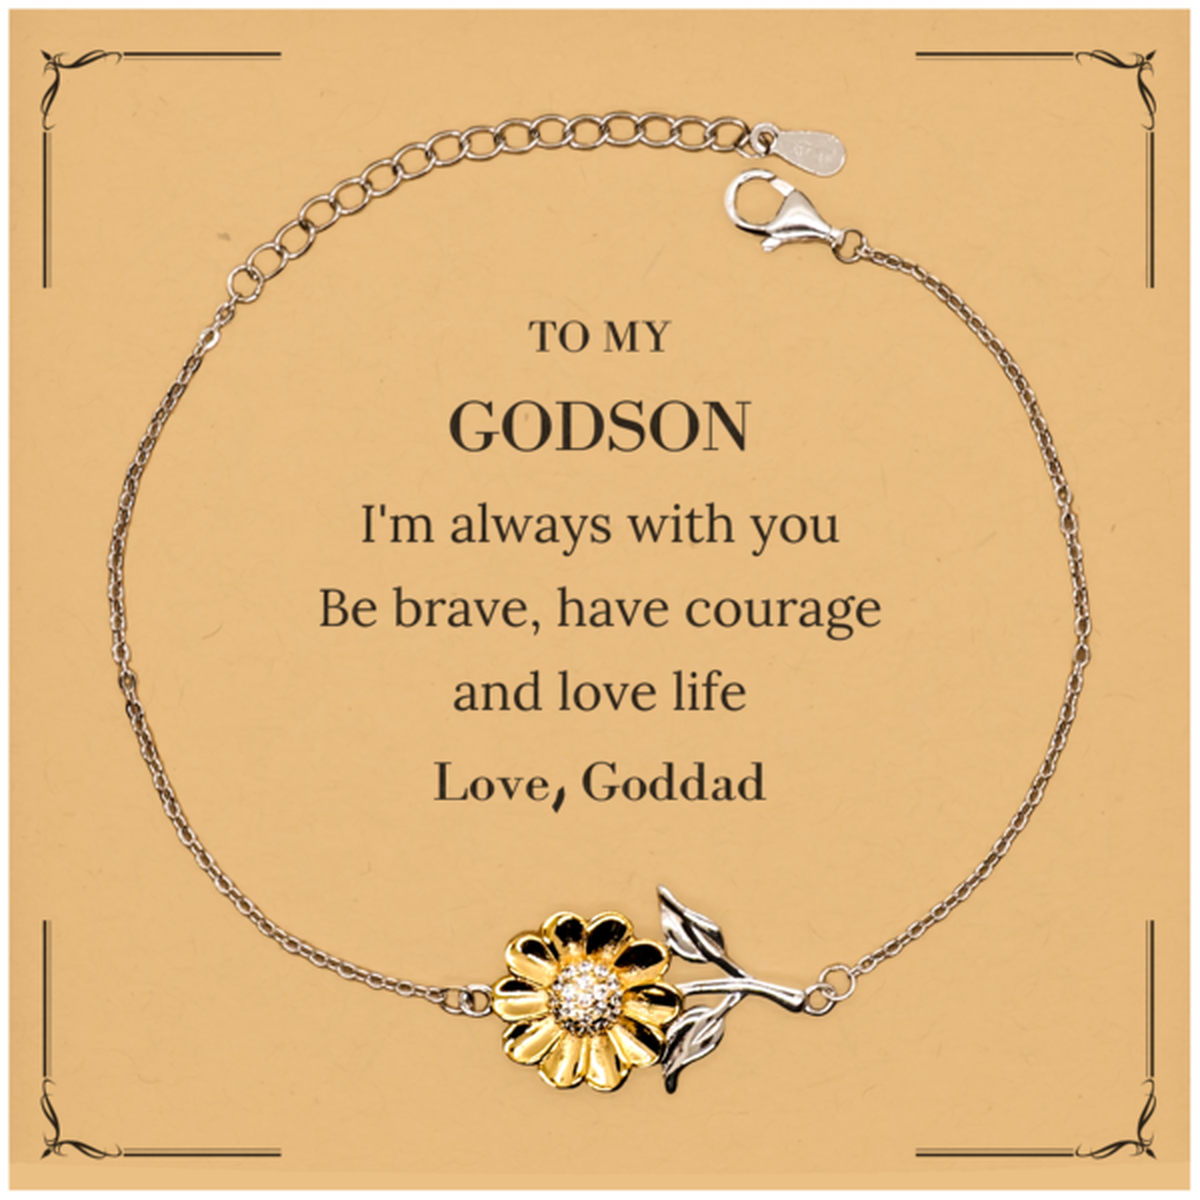 To My Godson Gifts from Goddad, Unique Sunflower Bracelet Inspirational Christmas Birthday Graduation Gifts for Godson I'm always with you. Be brave, have courage and love life. Love, Goddad